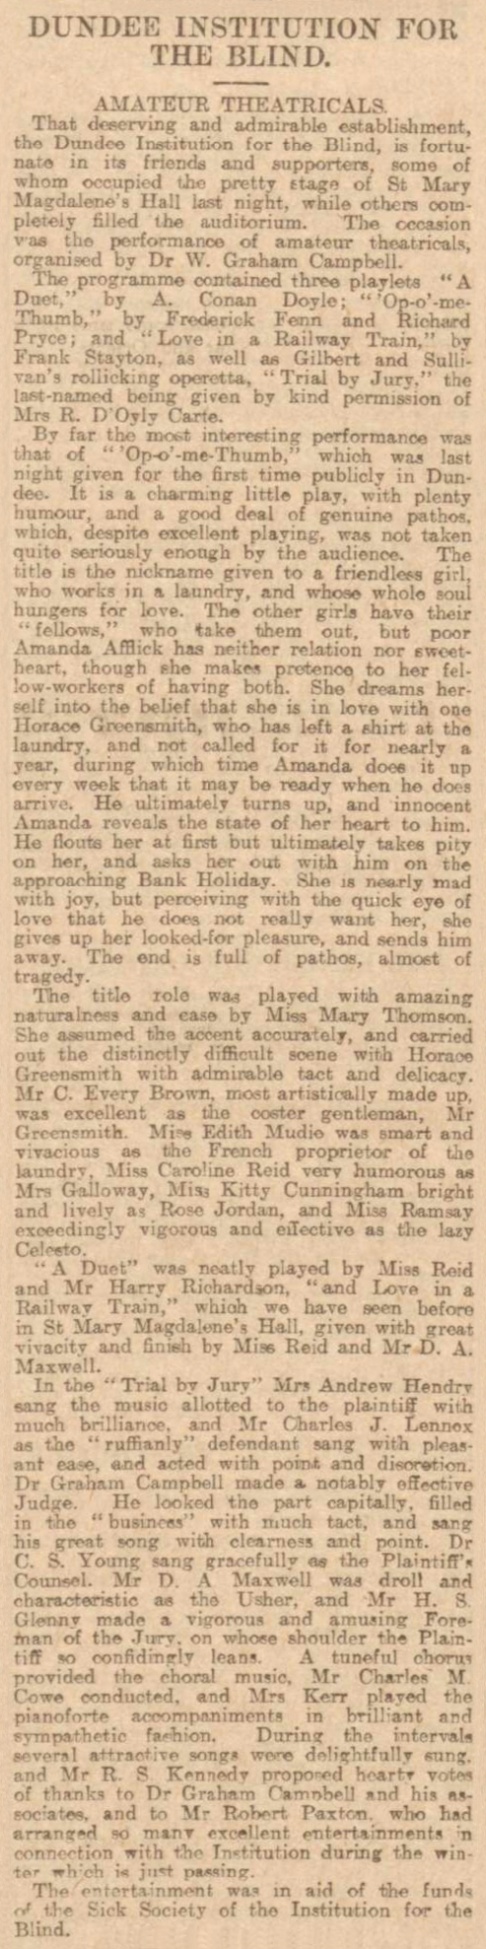 Review in Dundee Courier (30 march 1905, p. 6)